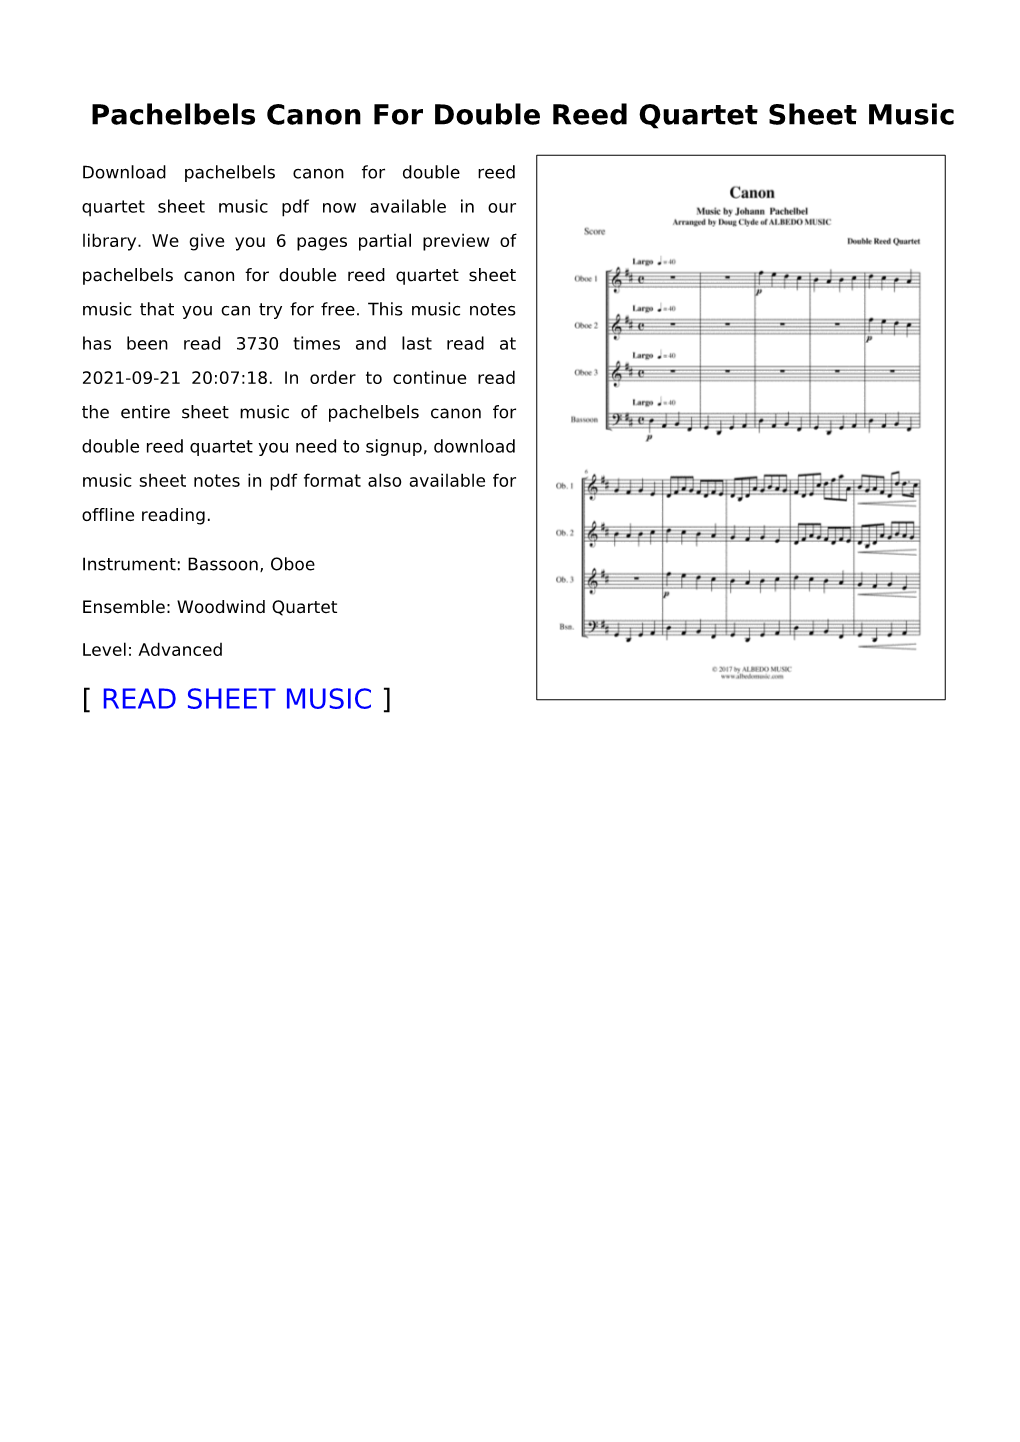 Pachelbels Canon for Double Reed Quartet Sheet Music